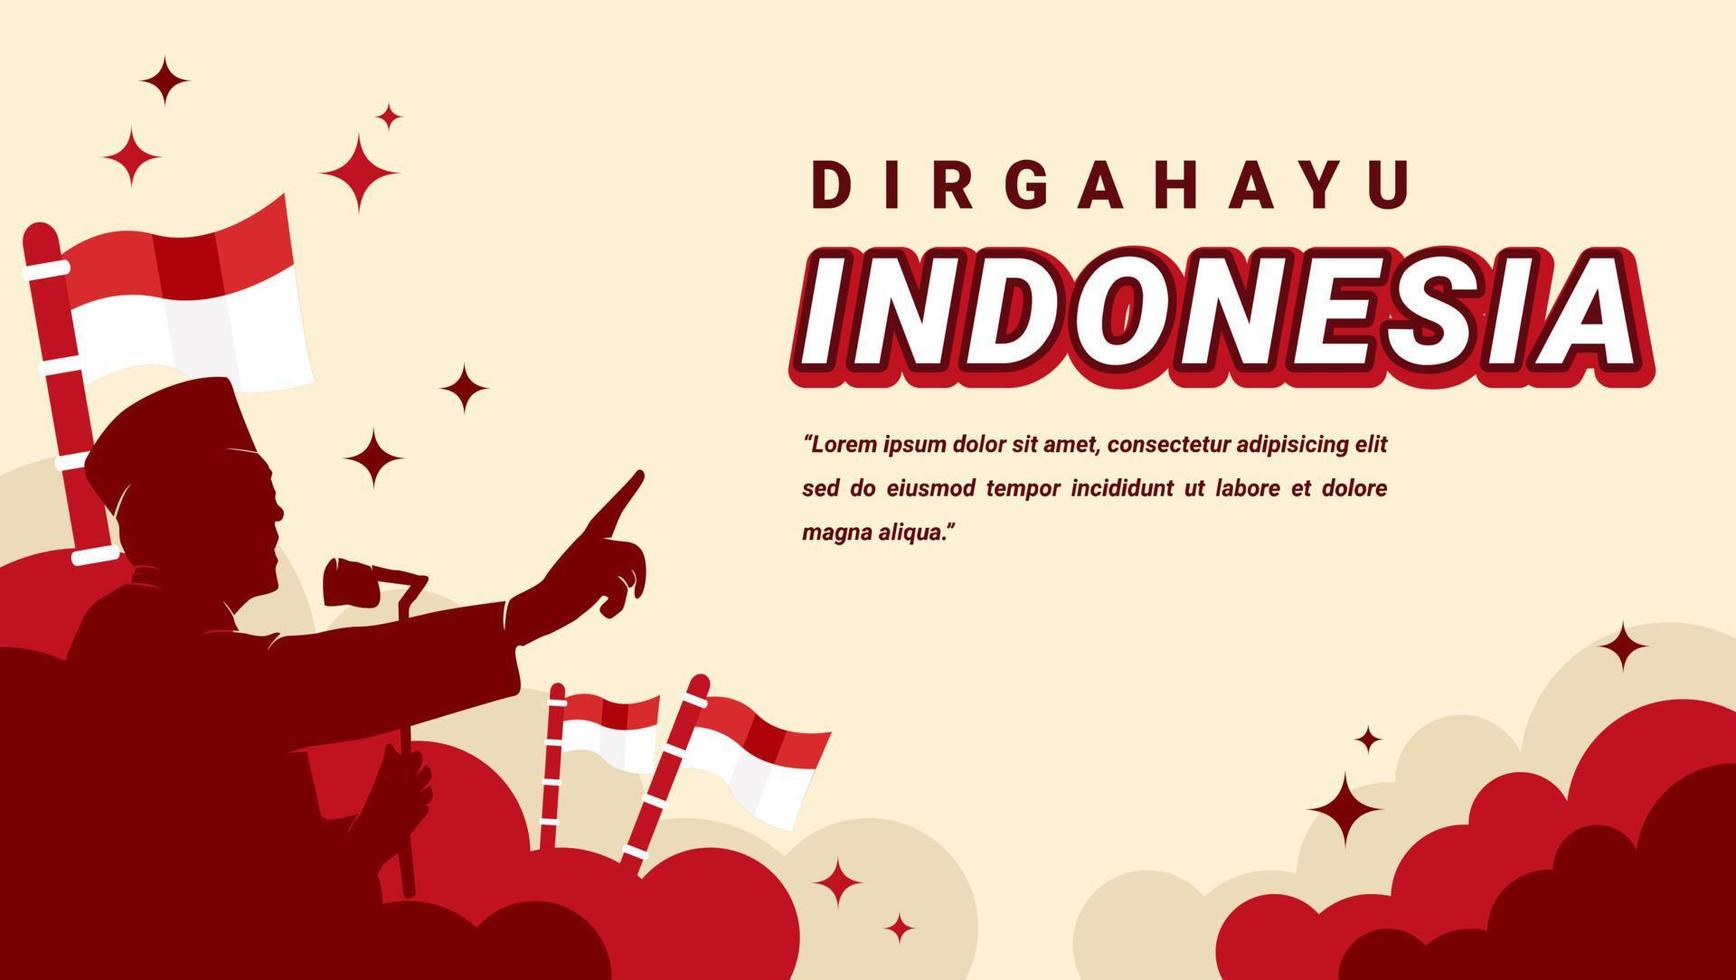 Indonesia hero patriotic man independence day banner background template design vector